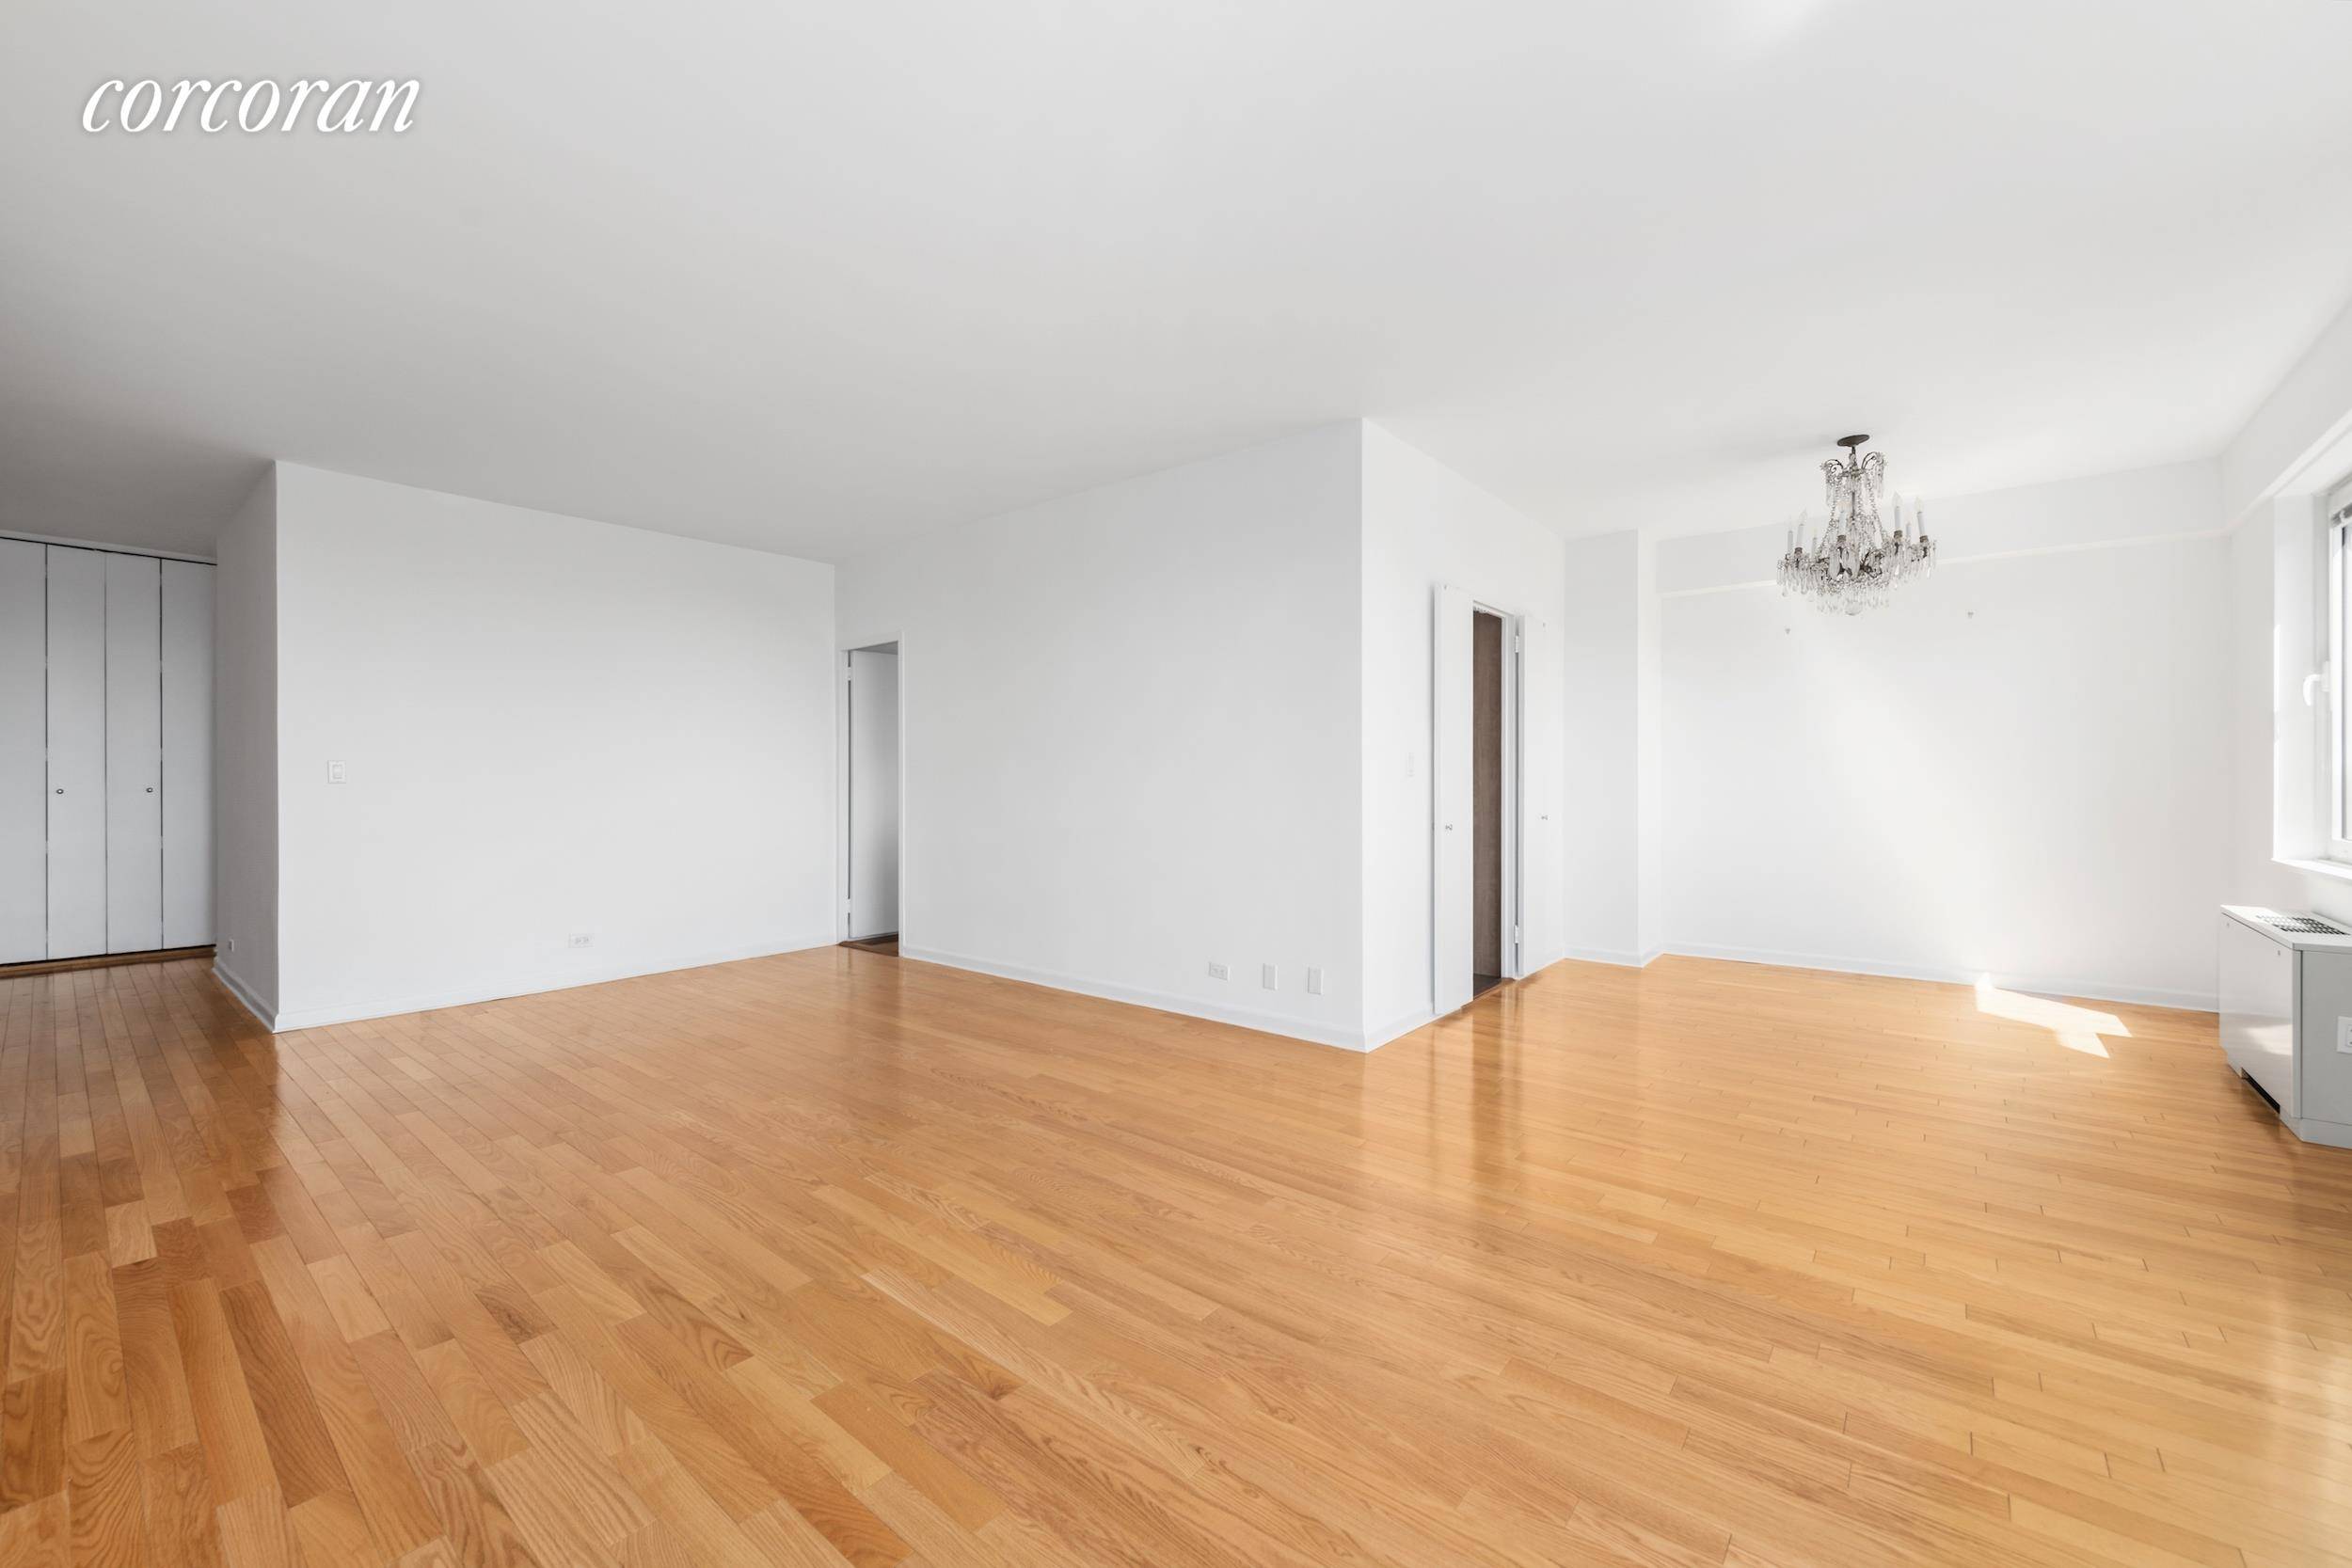 Located in the heart of the upscale Carnegie Hill neighborhood, this upper level 3 bedroom, 3 bathroom corner unit offers breathtaking, unobstructed views of Central Park overlooking the Jacqueline Kennedy ...